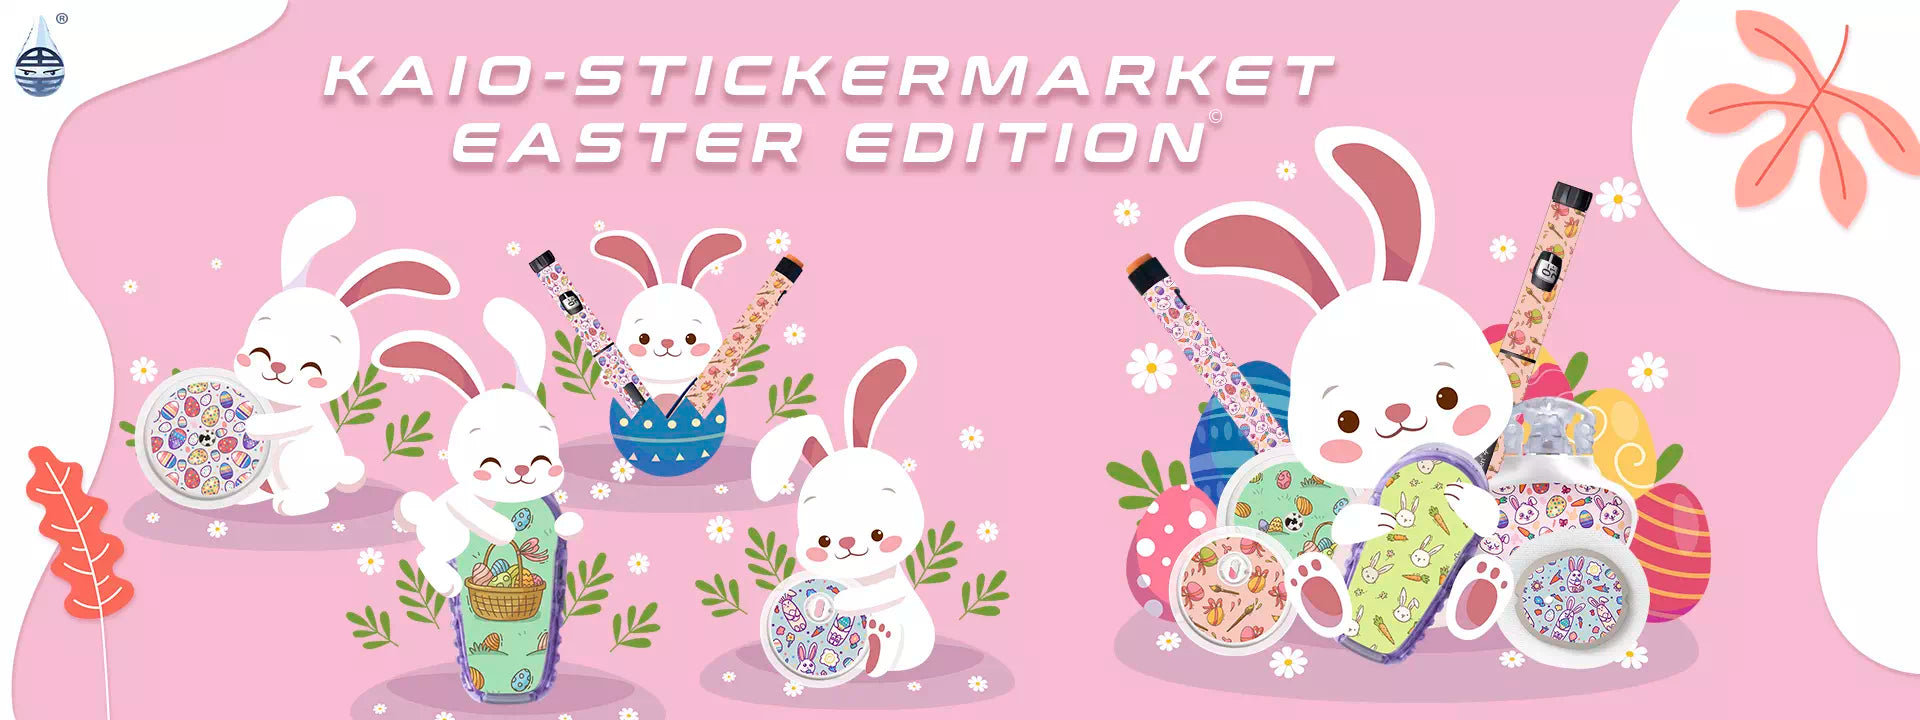 stickers-for-diabetic-devices-easter-collection.webp__PID:81586f62-4eaa-4e9d-97c9-5612ced4282d